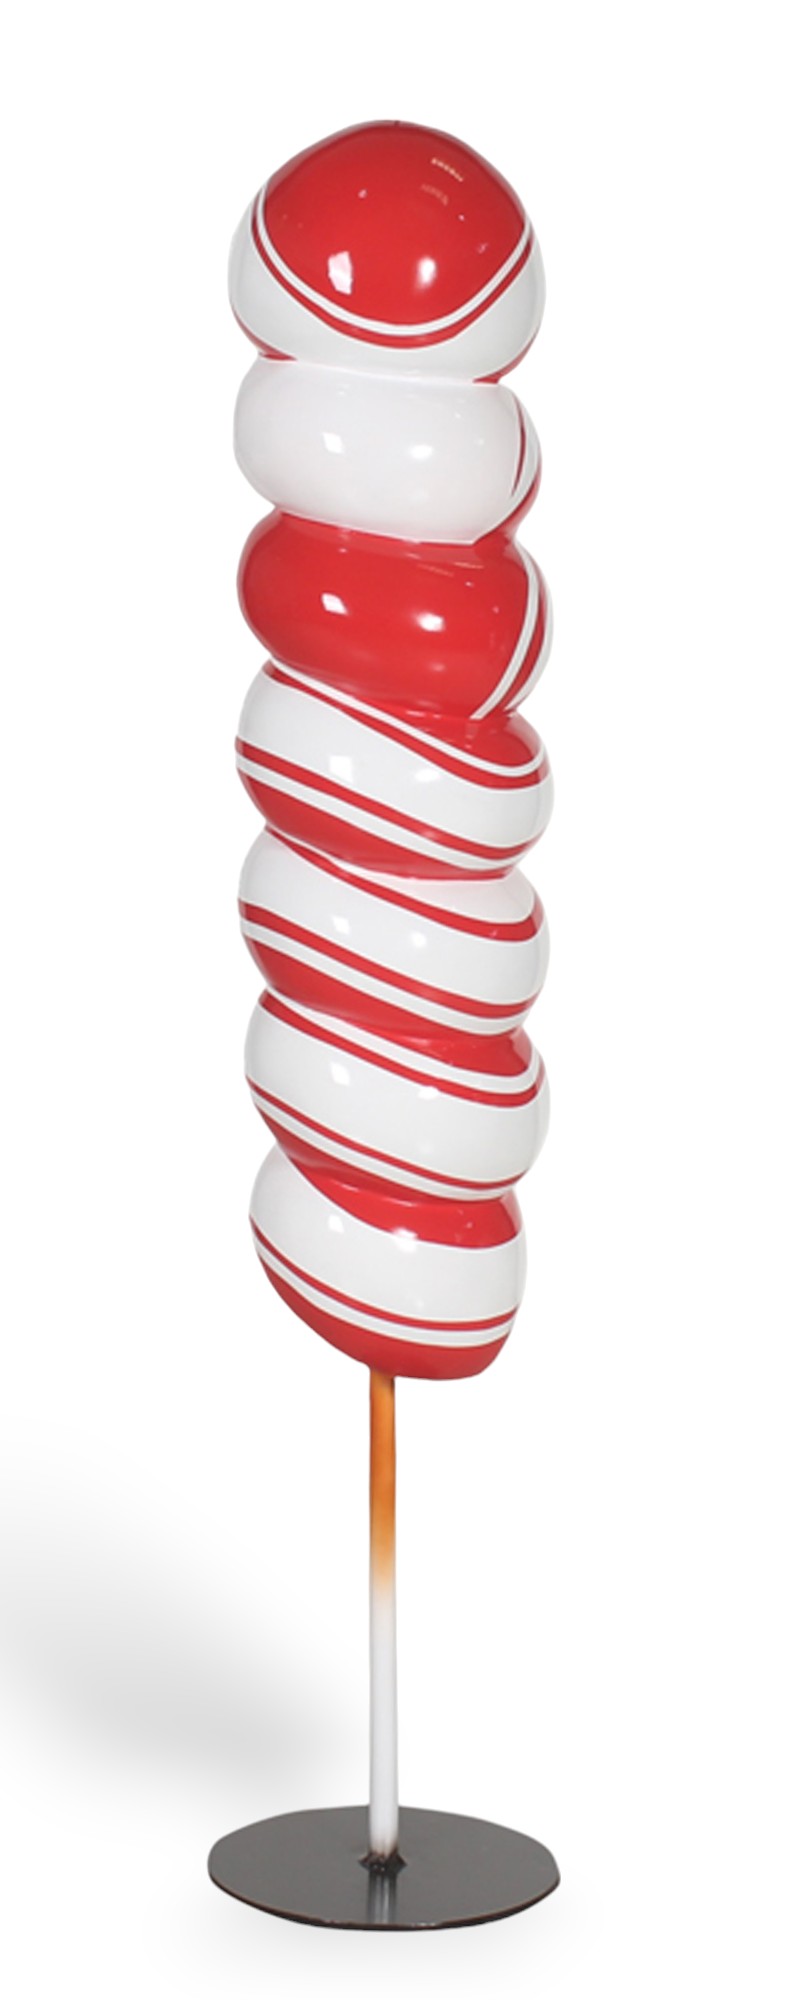 Candy Twist Lollipop Statue 4 FT Large on Stand Red and White